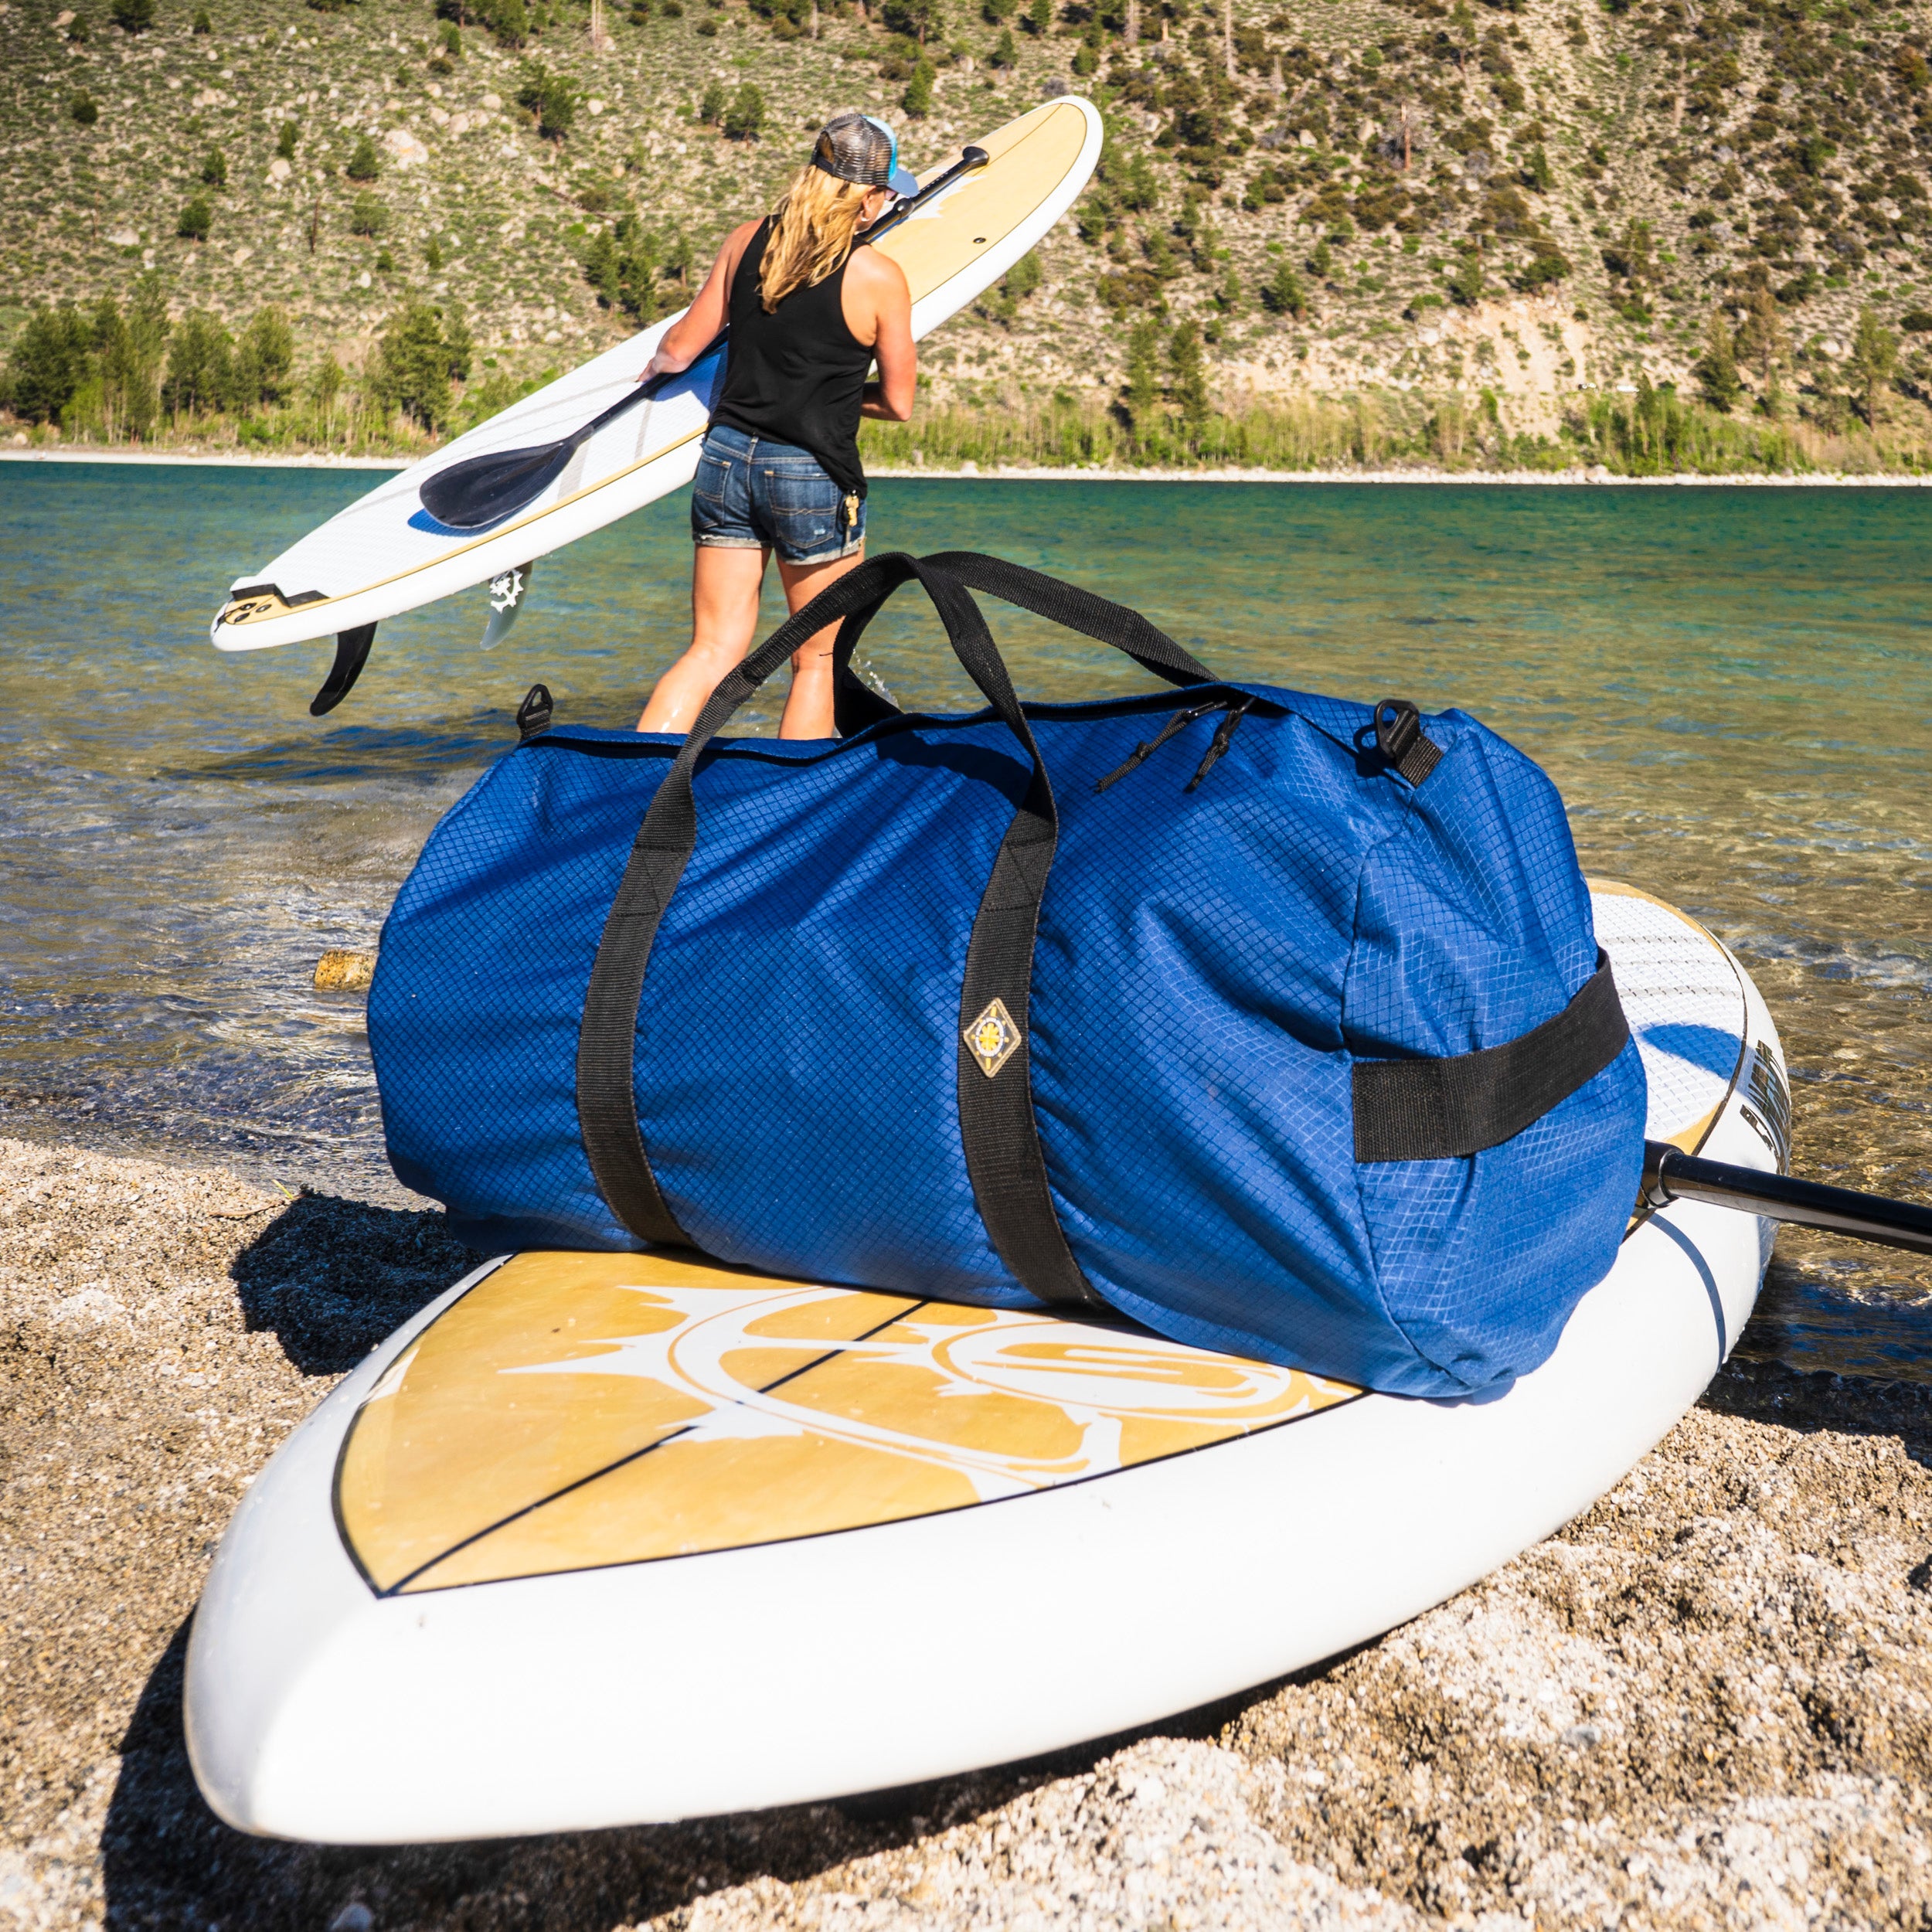 Duffel bag on a paddle board at a mountain lake. Northstar Bags make great adventure duffles. The SD1640 can carry an inflatable stand up paddle board, life vests, oars, towels, and a change of clothes. Northstar sport duffles carry the fun!